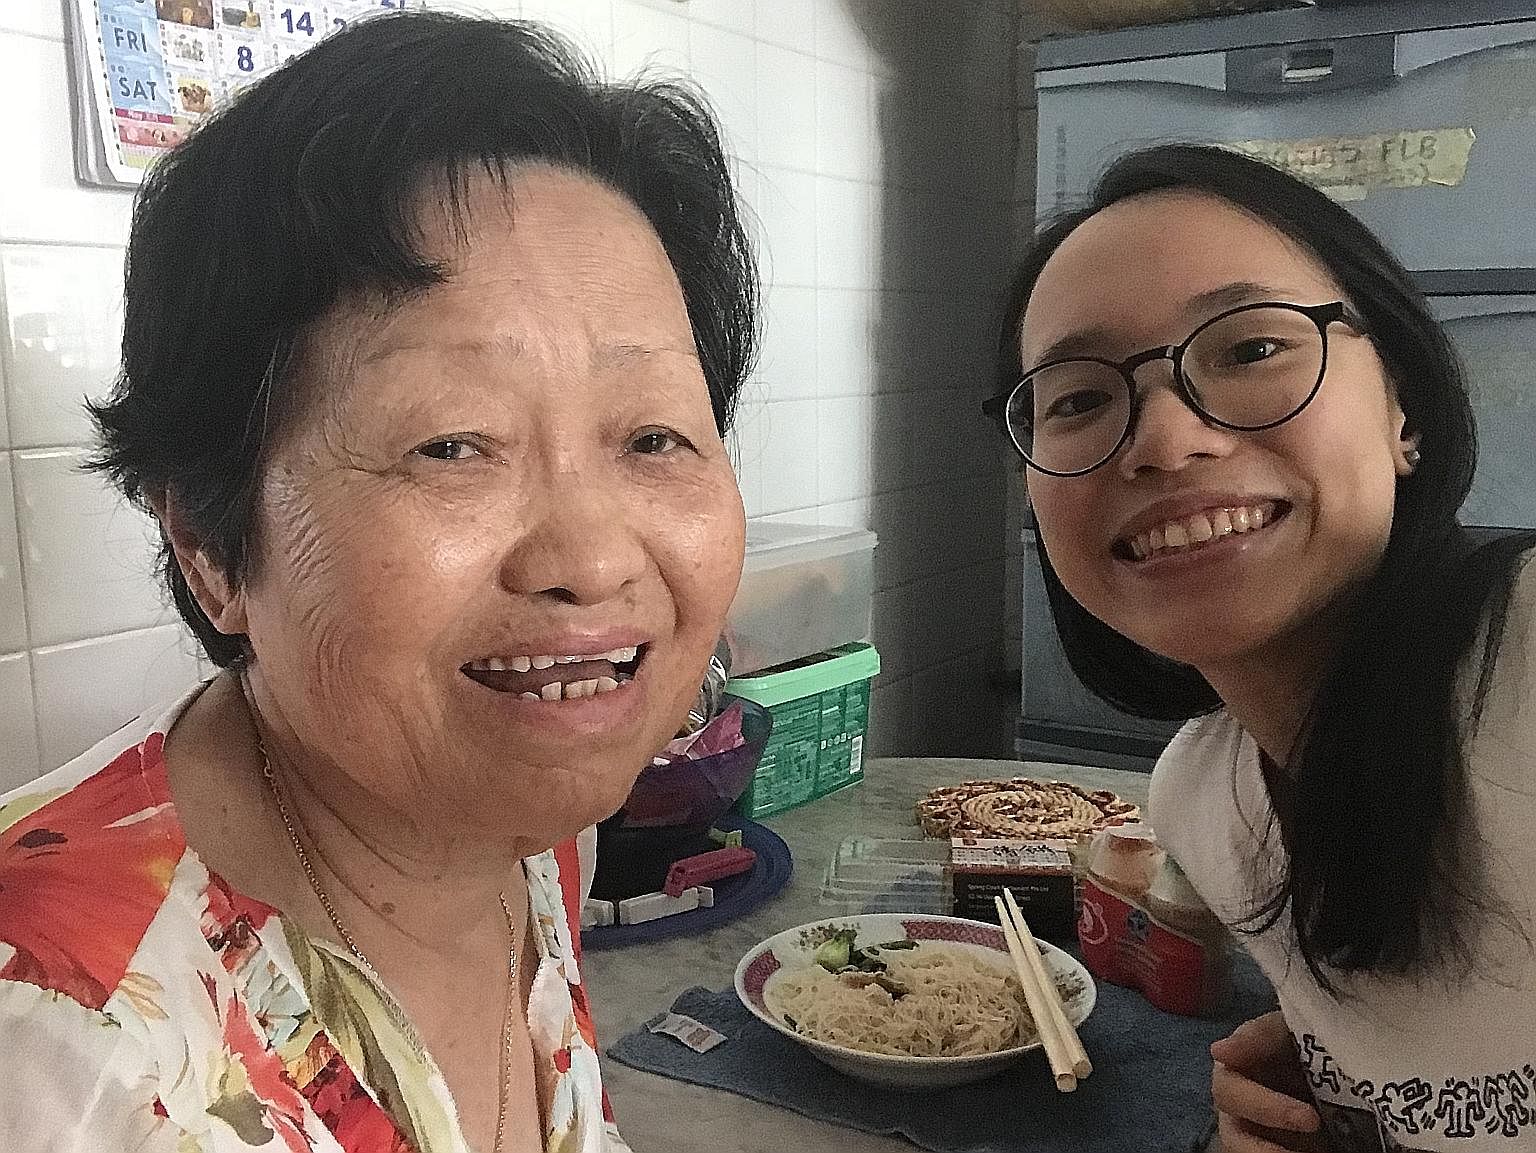 The writer, 19, and her grandmother having lunch in the latter's kitchen.